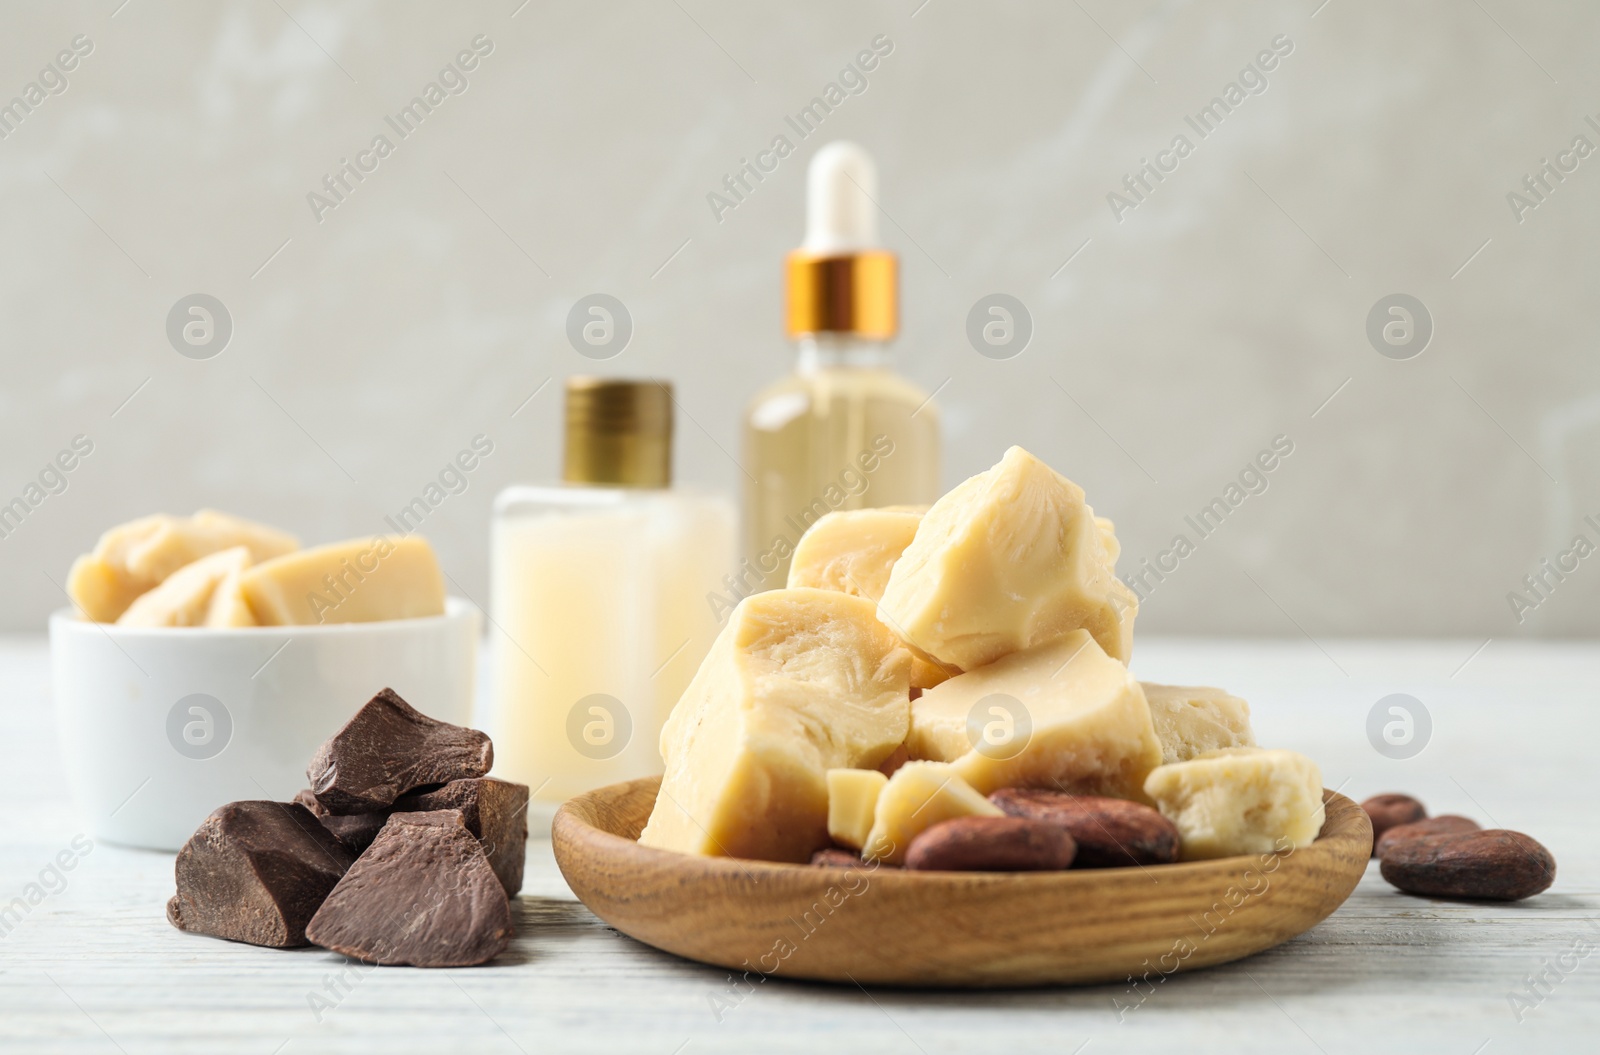 Photo of Organic cocoa butter on white wooden table